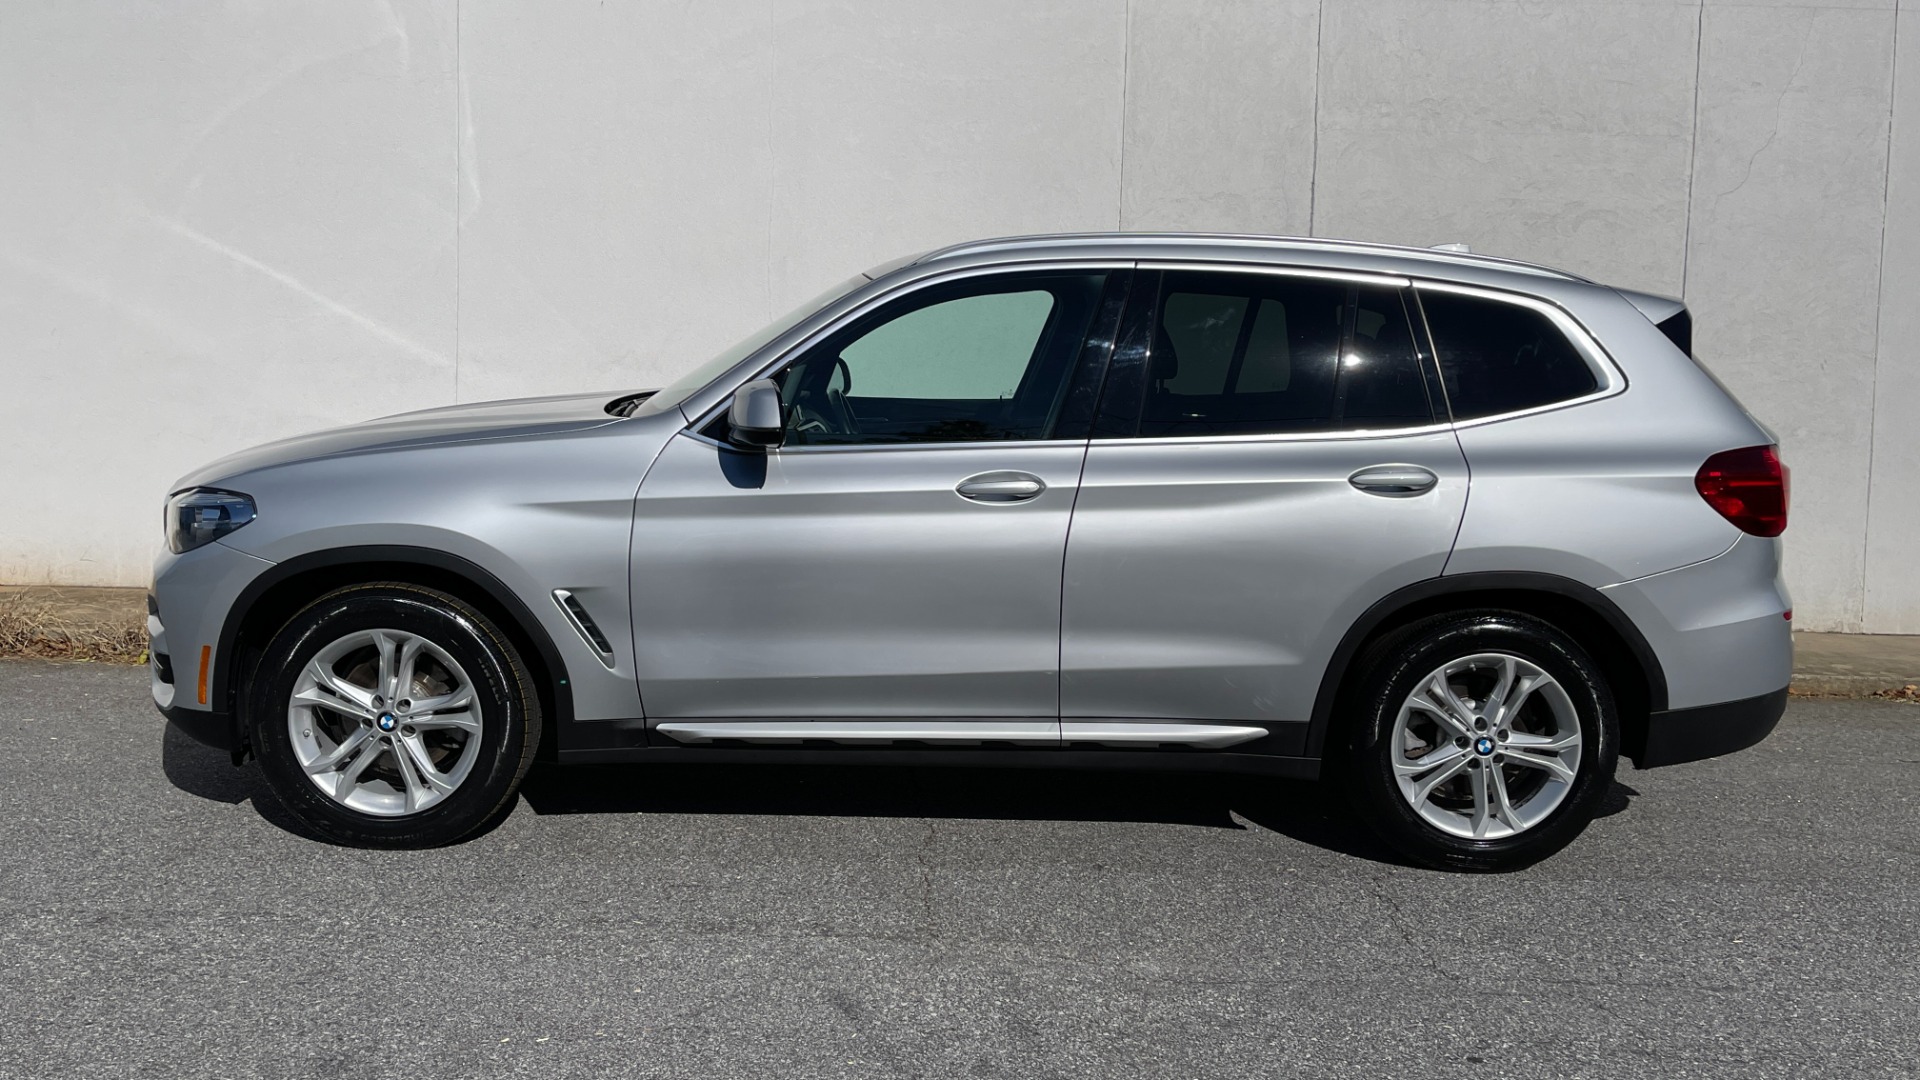 Used 2019 BMW X3 xDrive30i / DRIVING ASSISTANCE / PANORAMIC ROOF / HEATED SEATS / BACKUP CAM for sale Sold at Formula Imports in Charlotte NC 28227 3